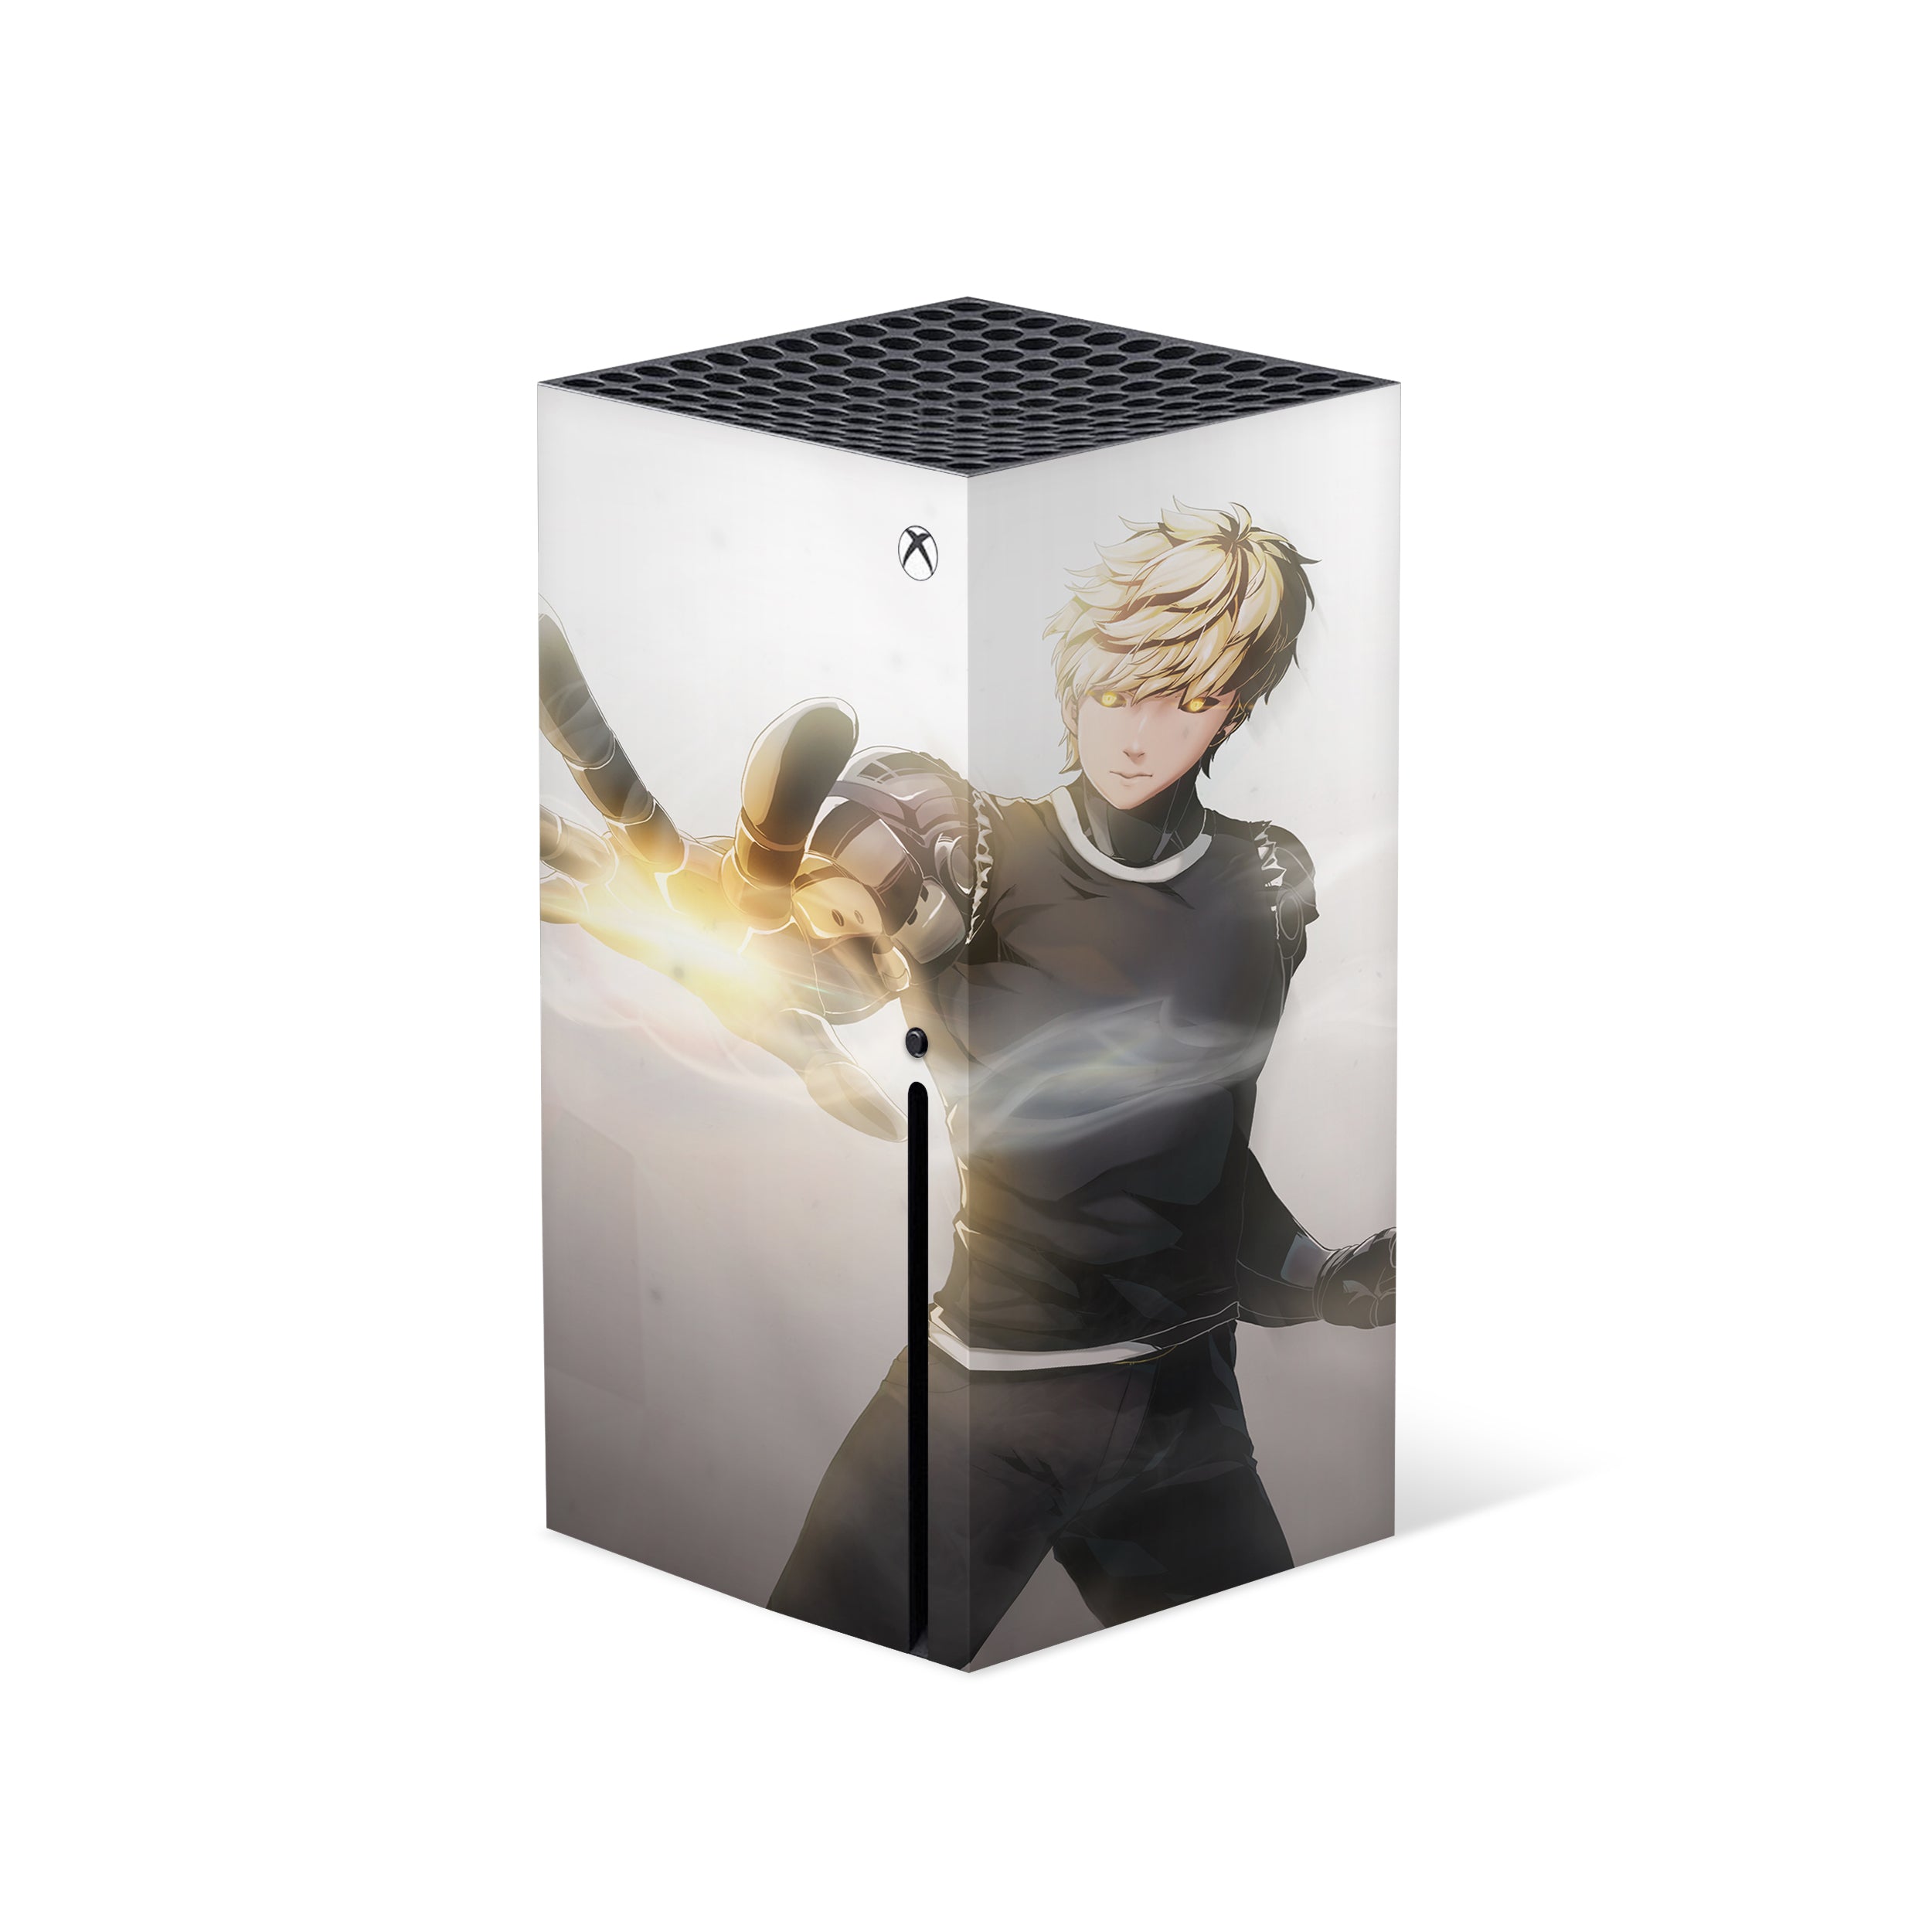 A video game skin featuring a One Punch Man Genos design for the Xbox Series X.